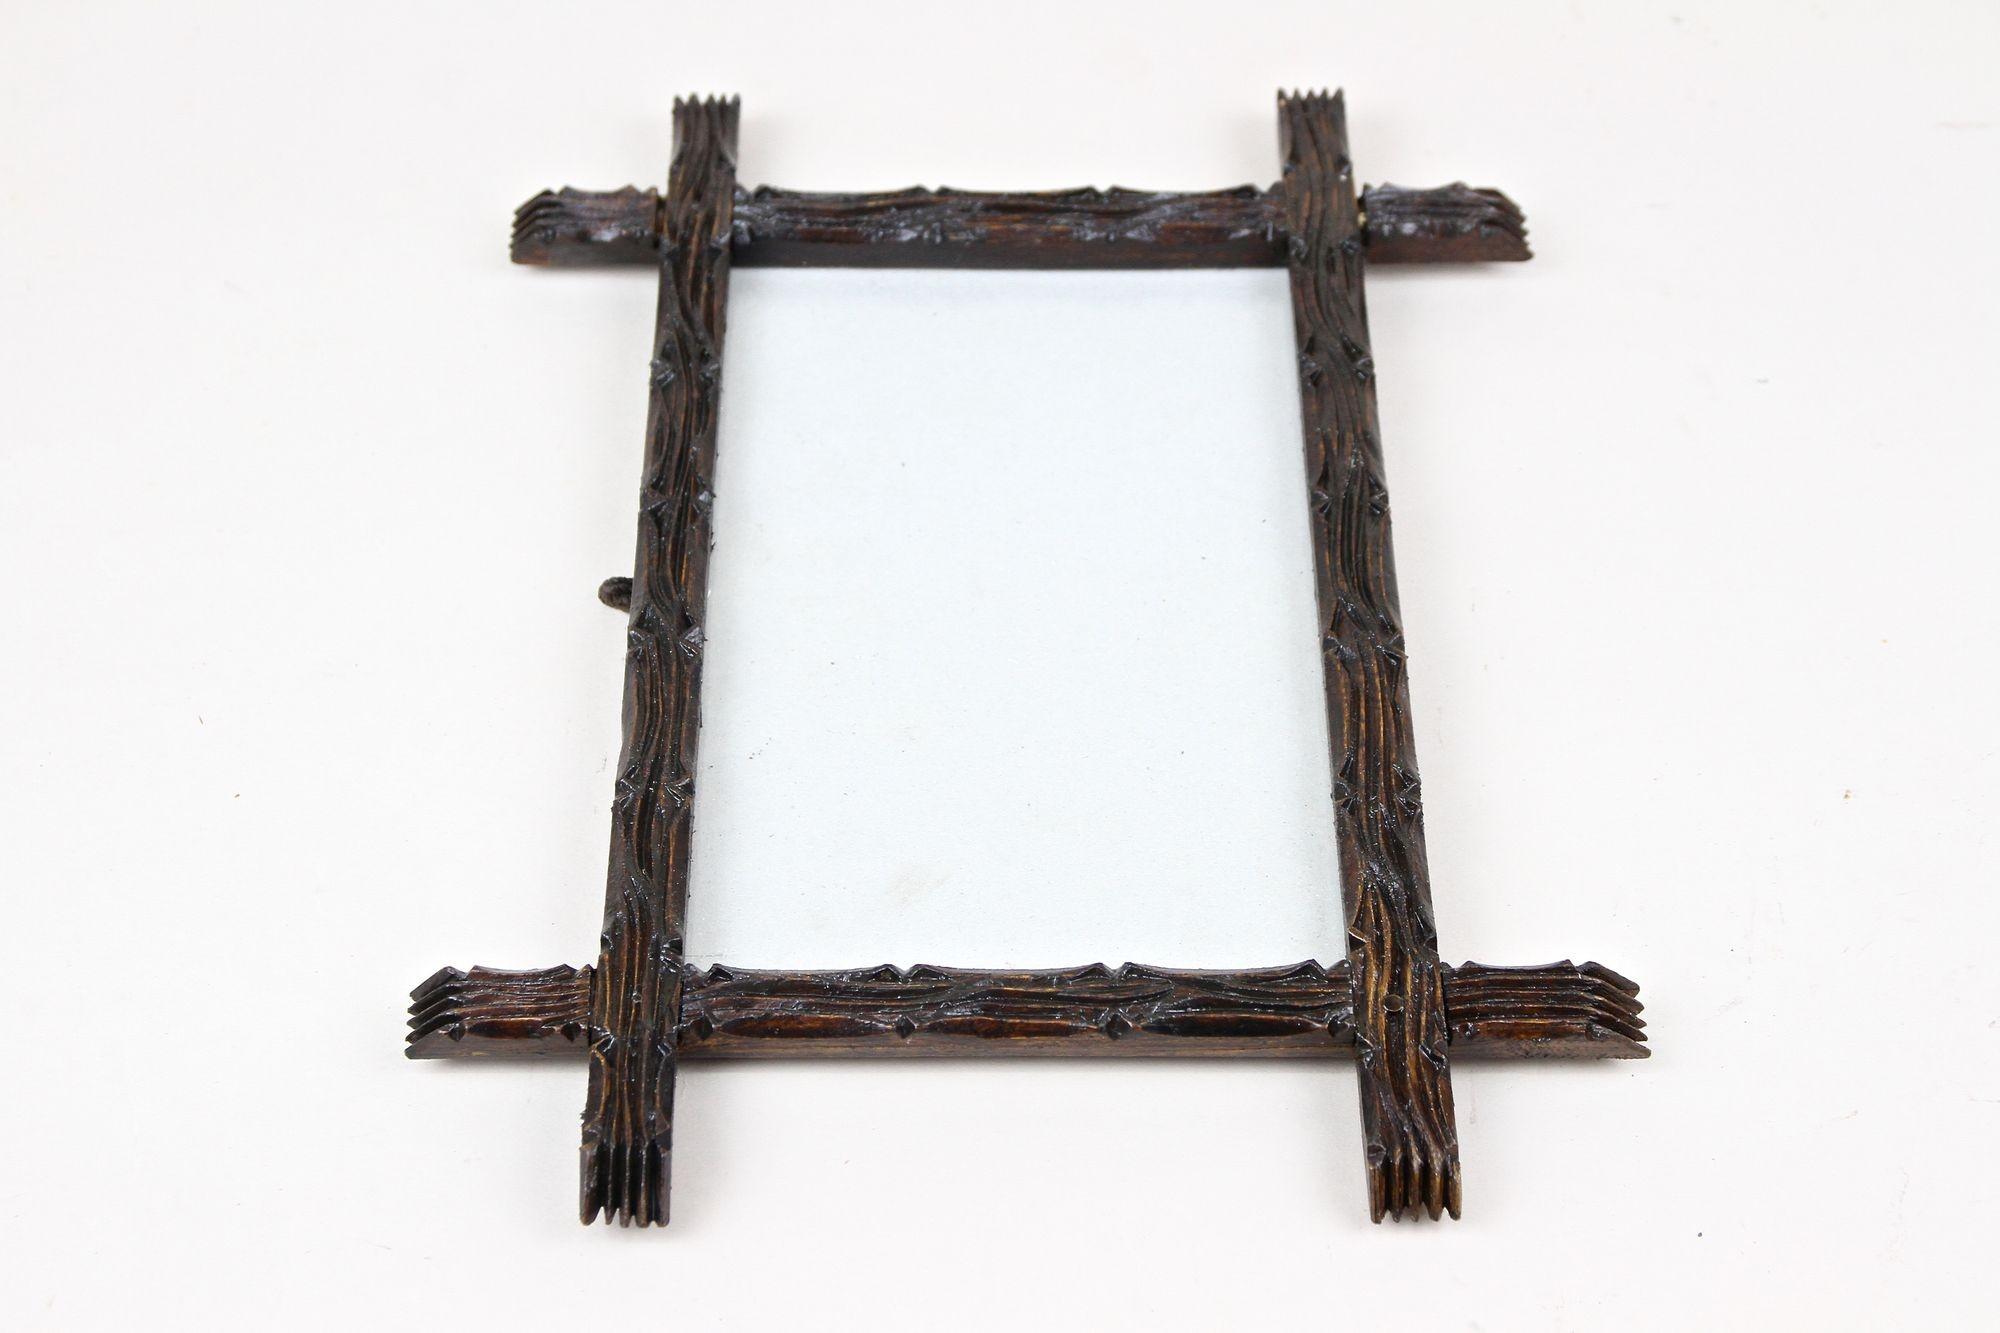 Blown Glass Rustic Wooden Photo Frame, Black Forest Style - Handcarved, Austria circa 1860